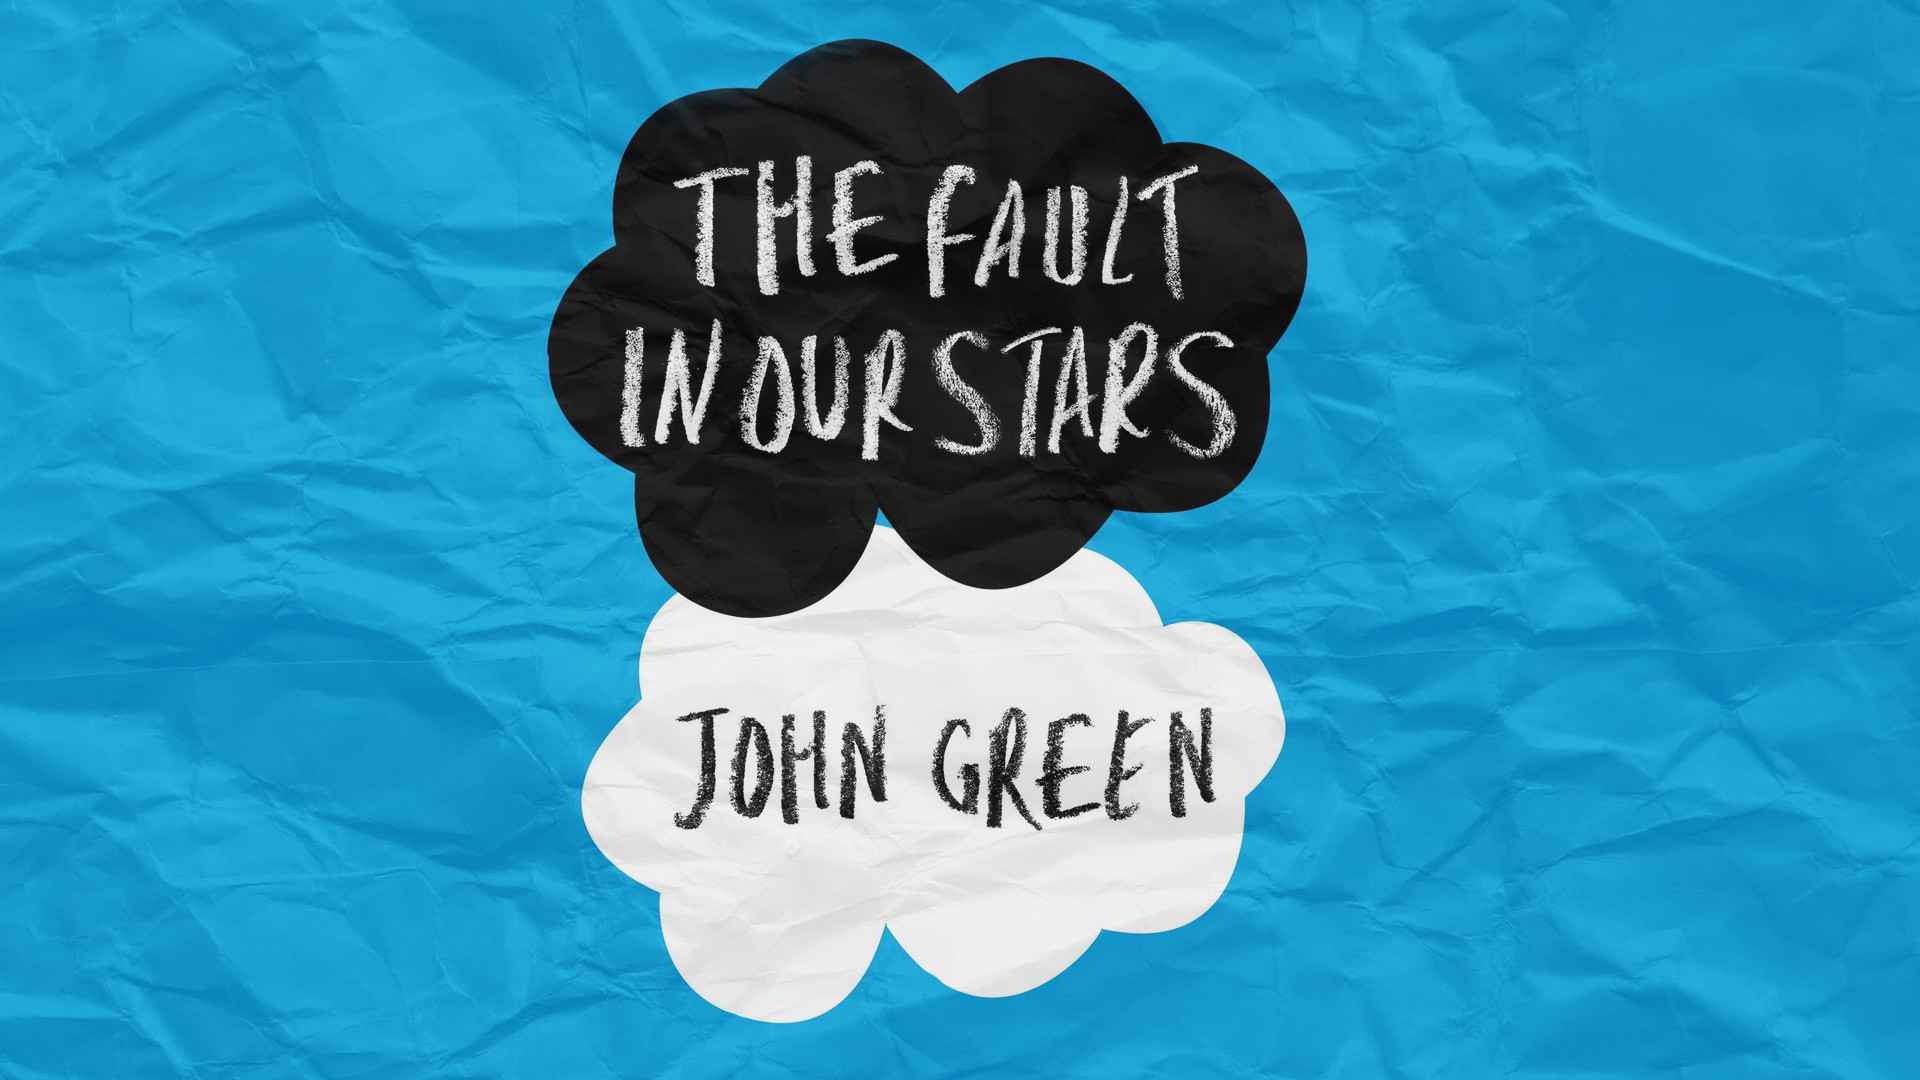 1920x1080 The Fault in Our Stars Wallpaper 40444